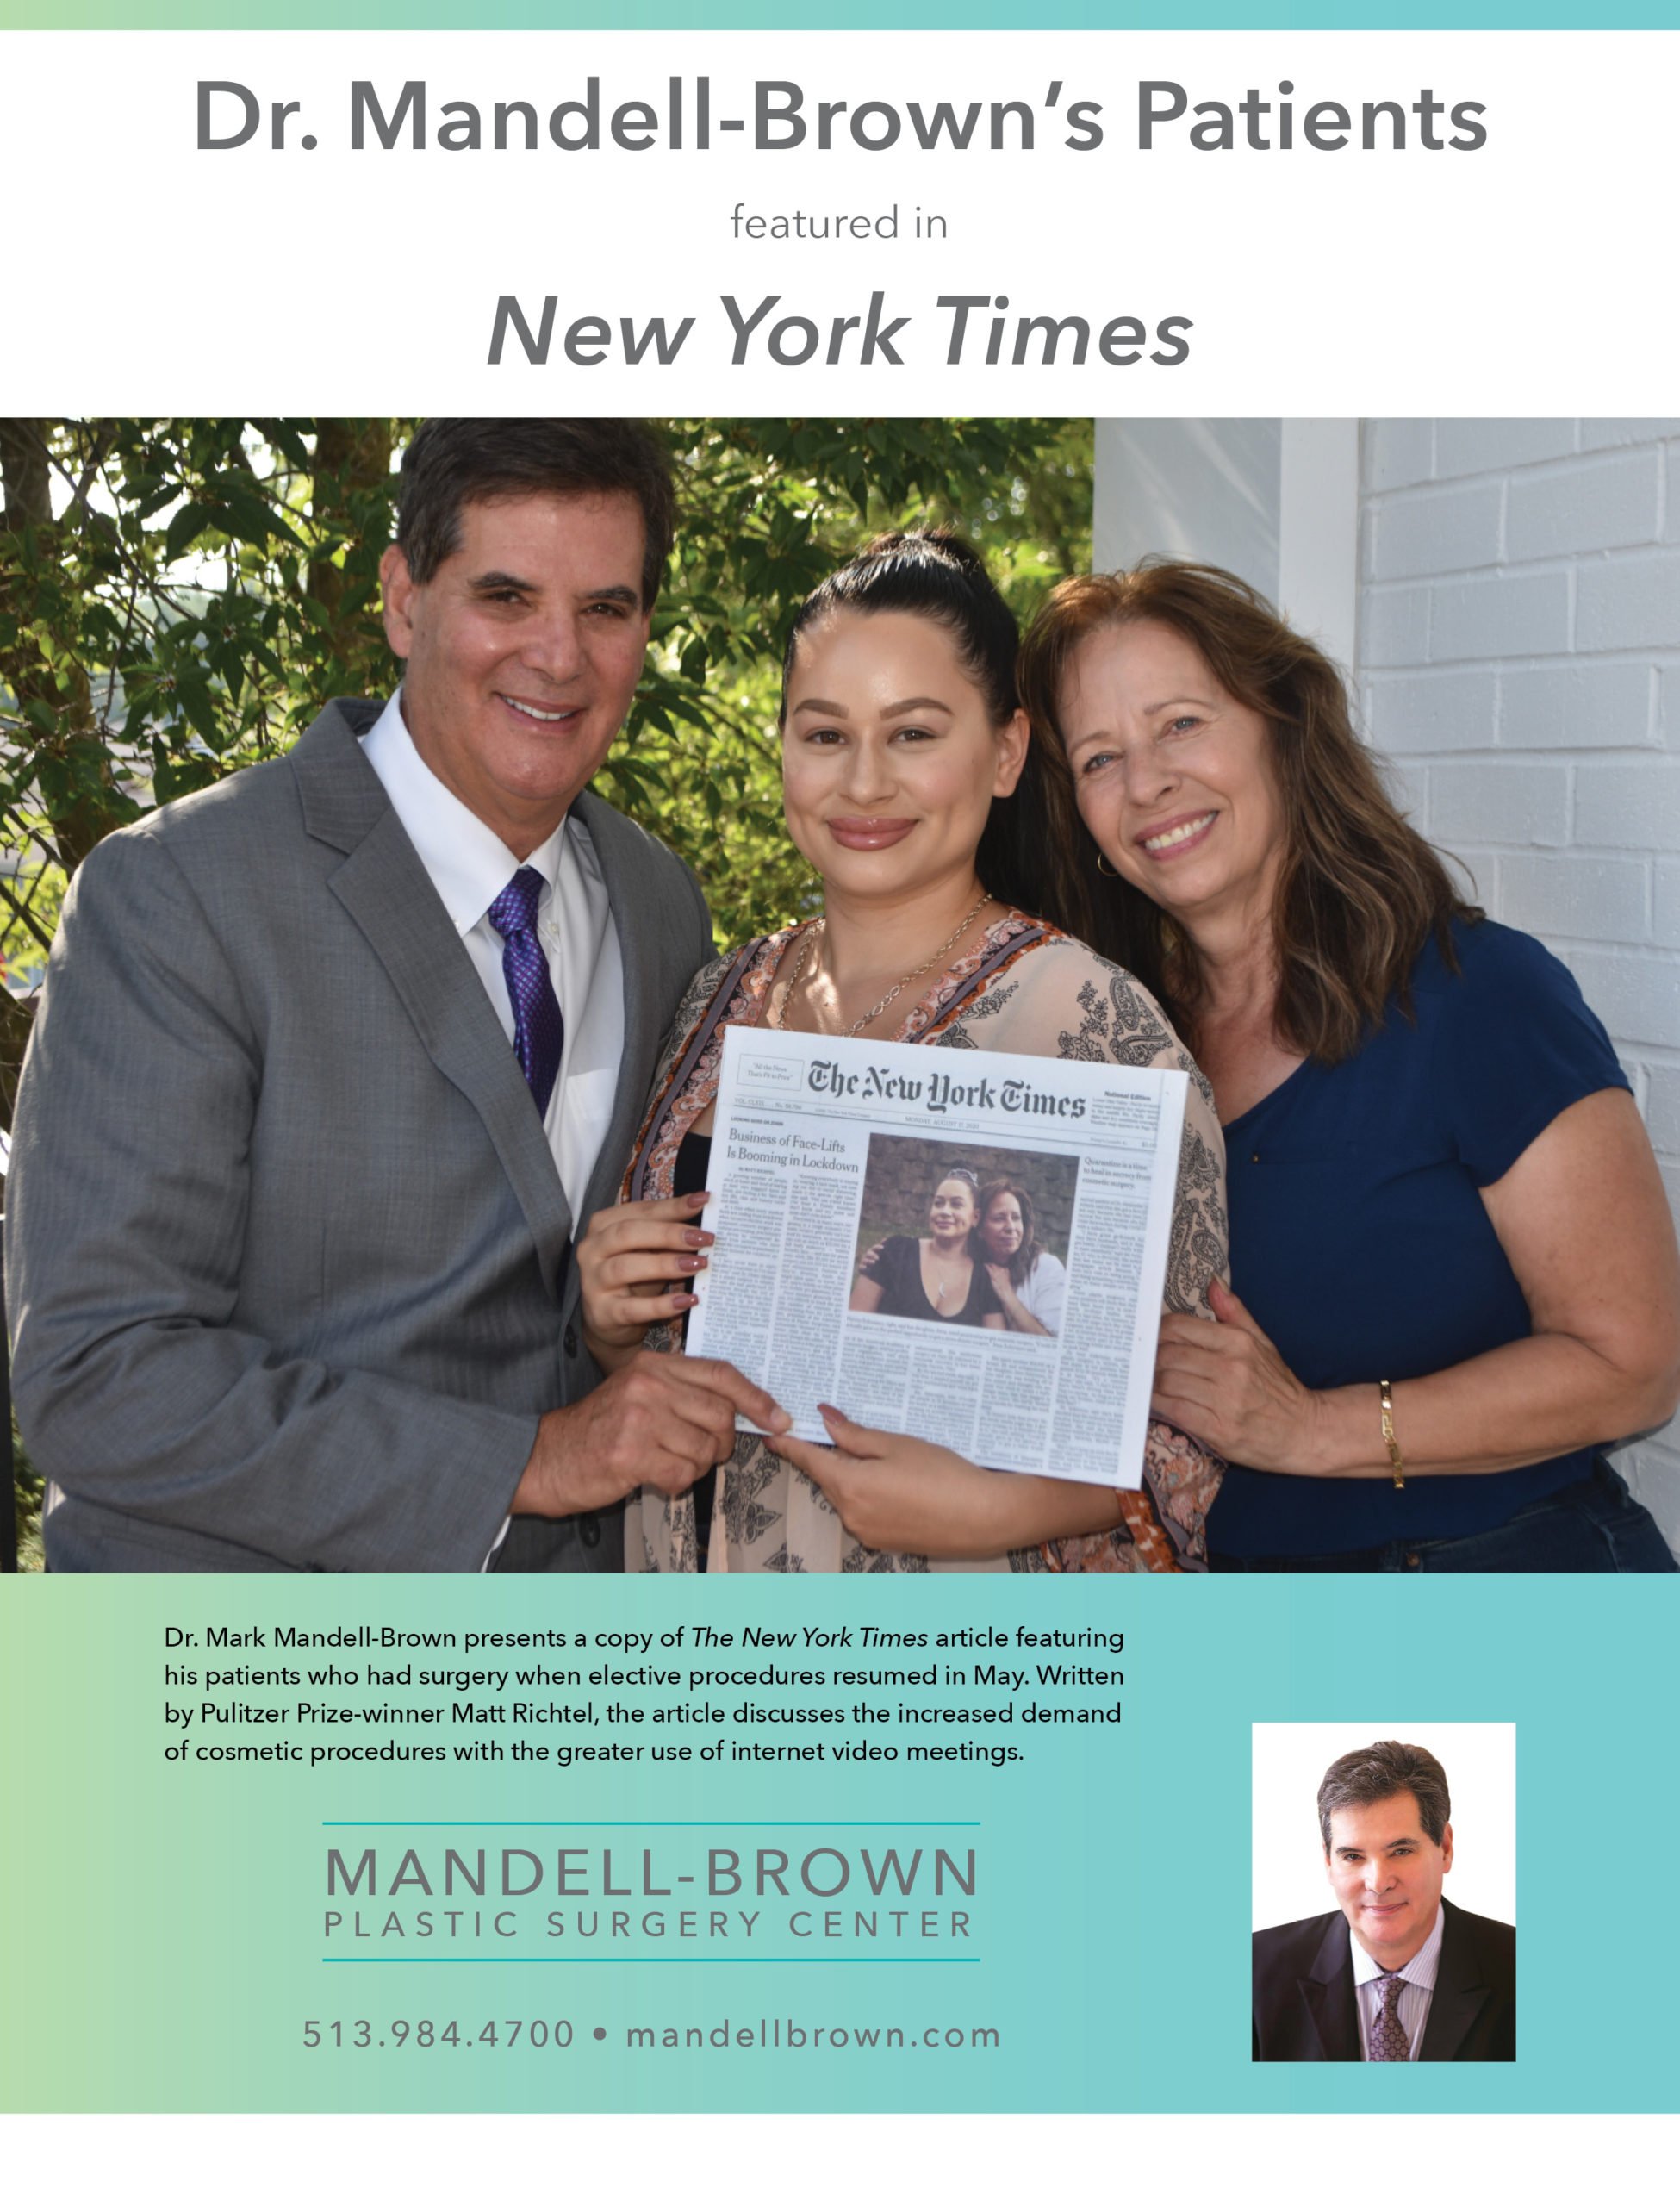 Dr. Mark Mandell-Brown's Patients New York Times Feature